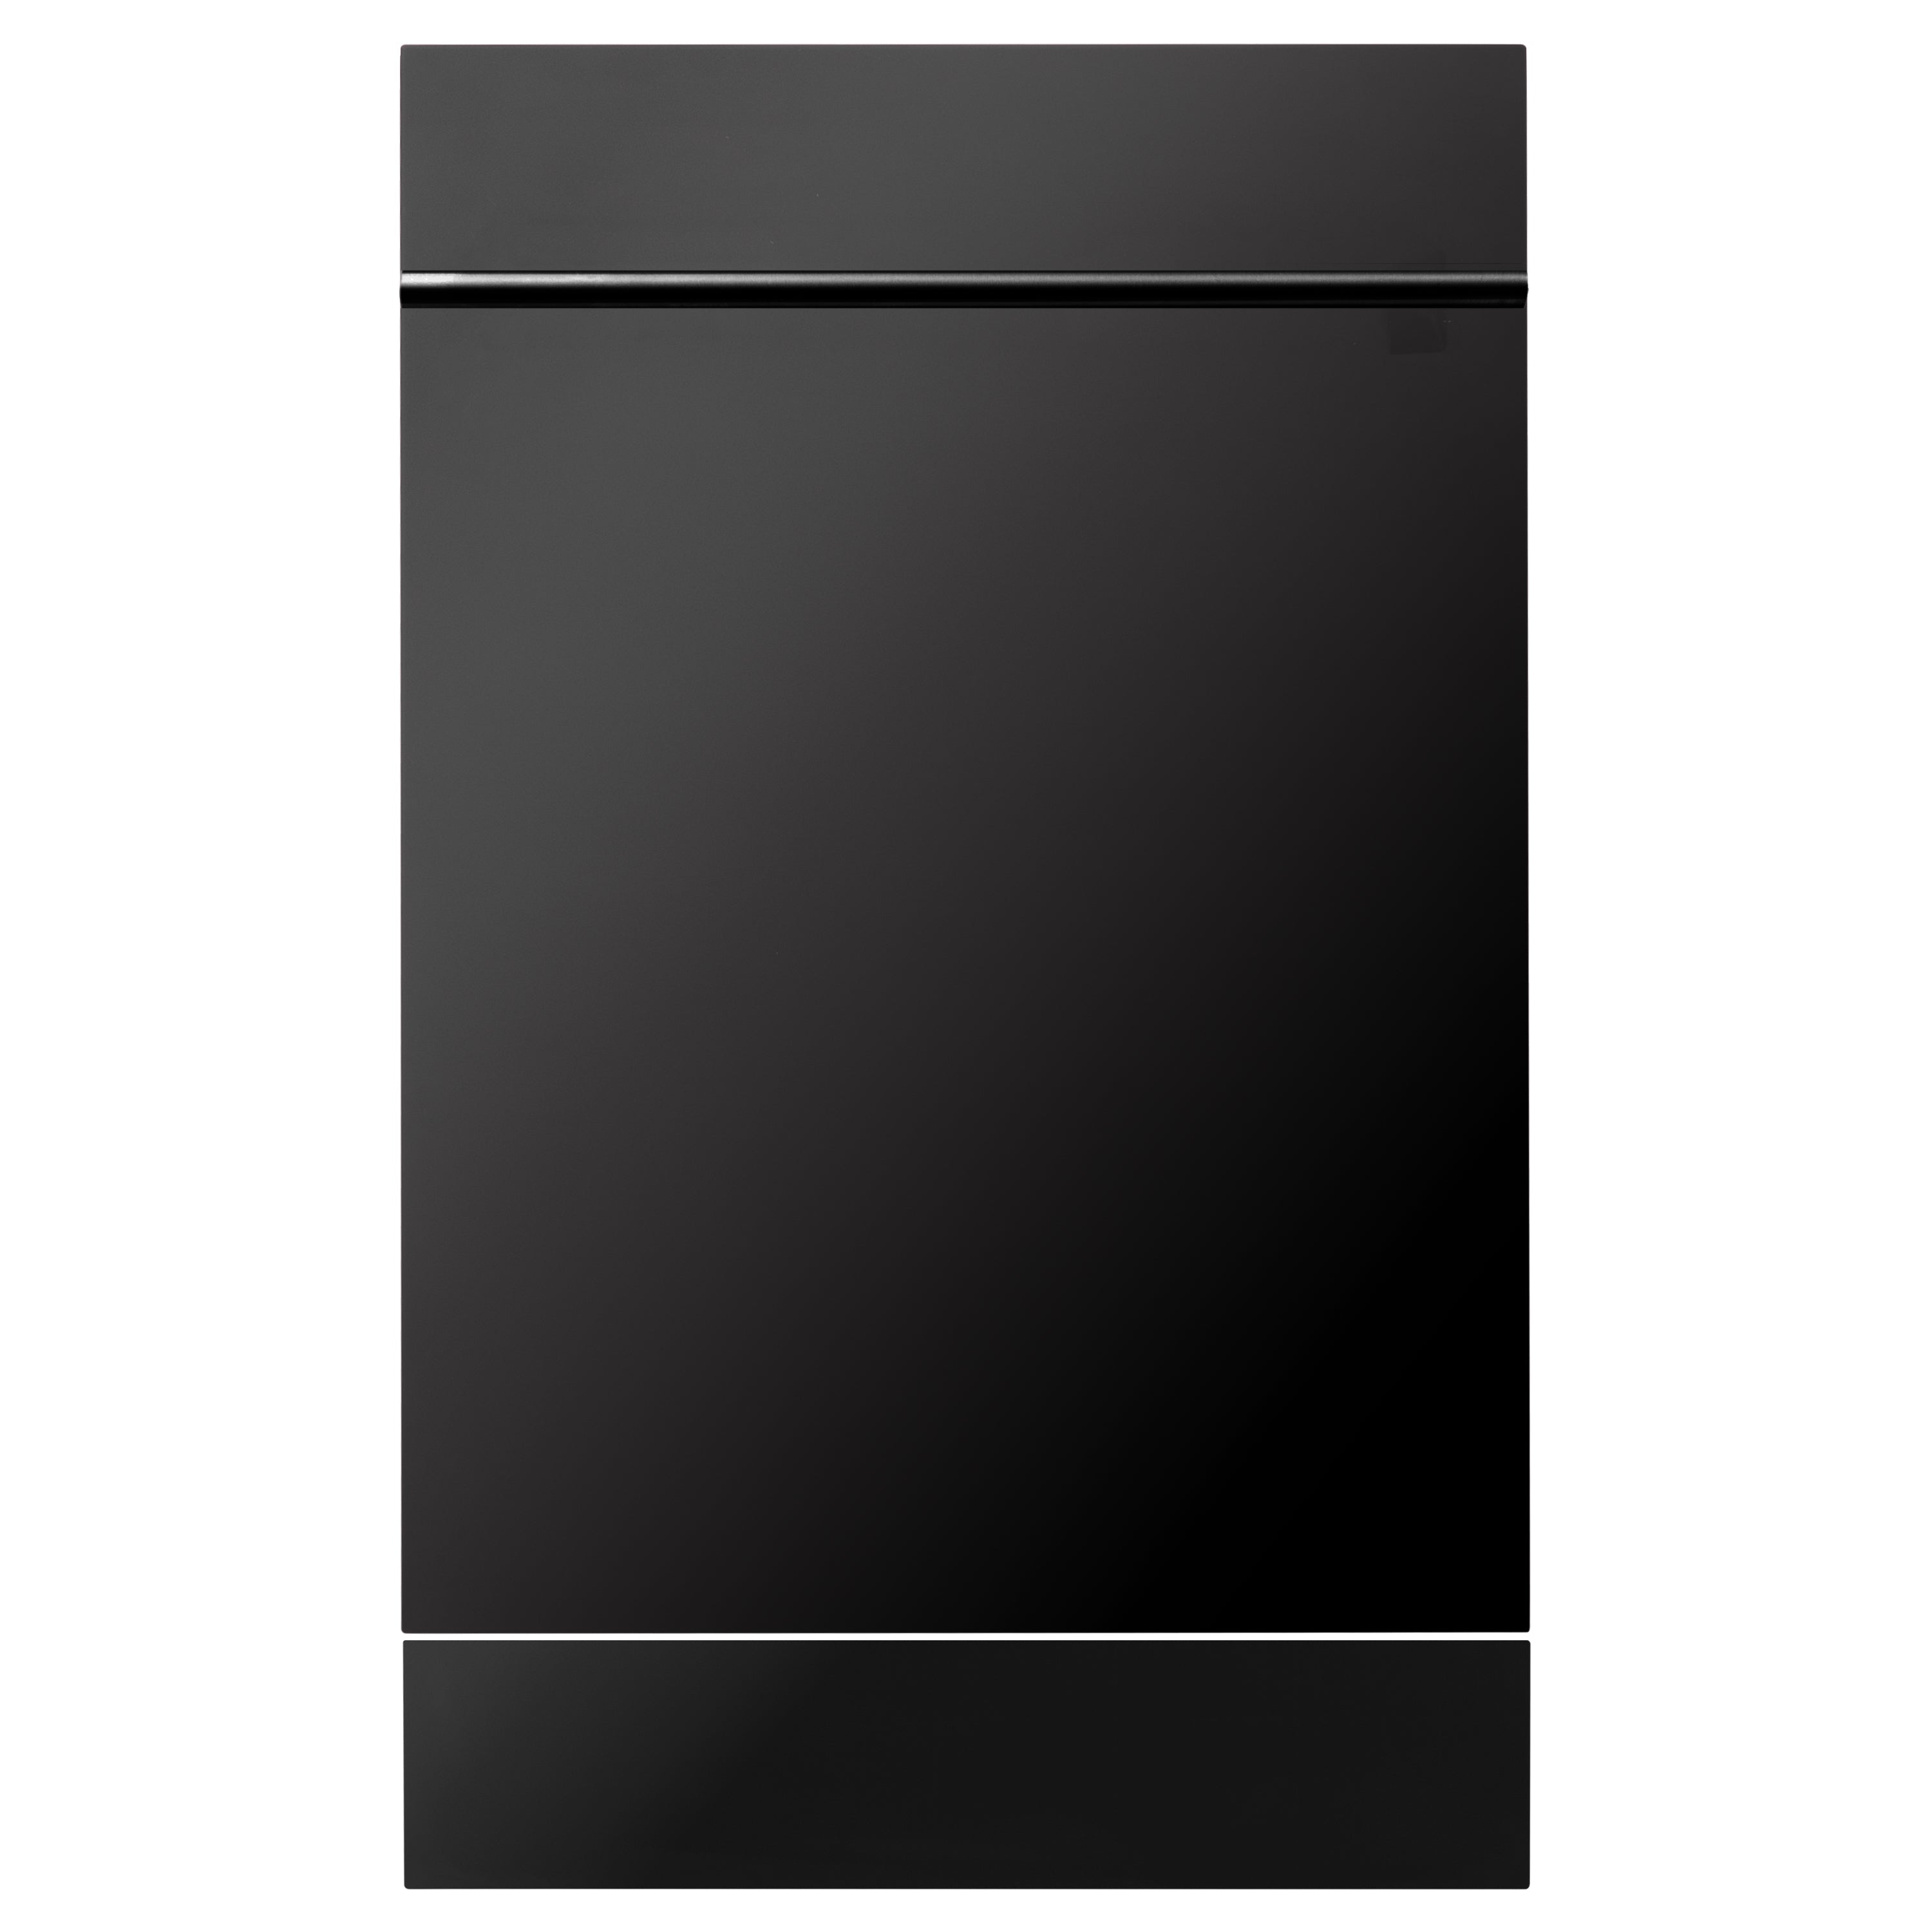 ZLINE 18" Dishwasher Panel in Black Stainless Steel with Modern Handle (DP-BS-H-18)